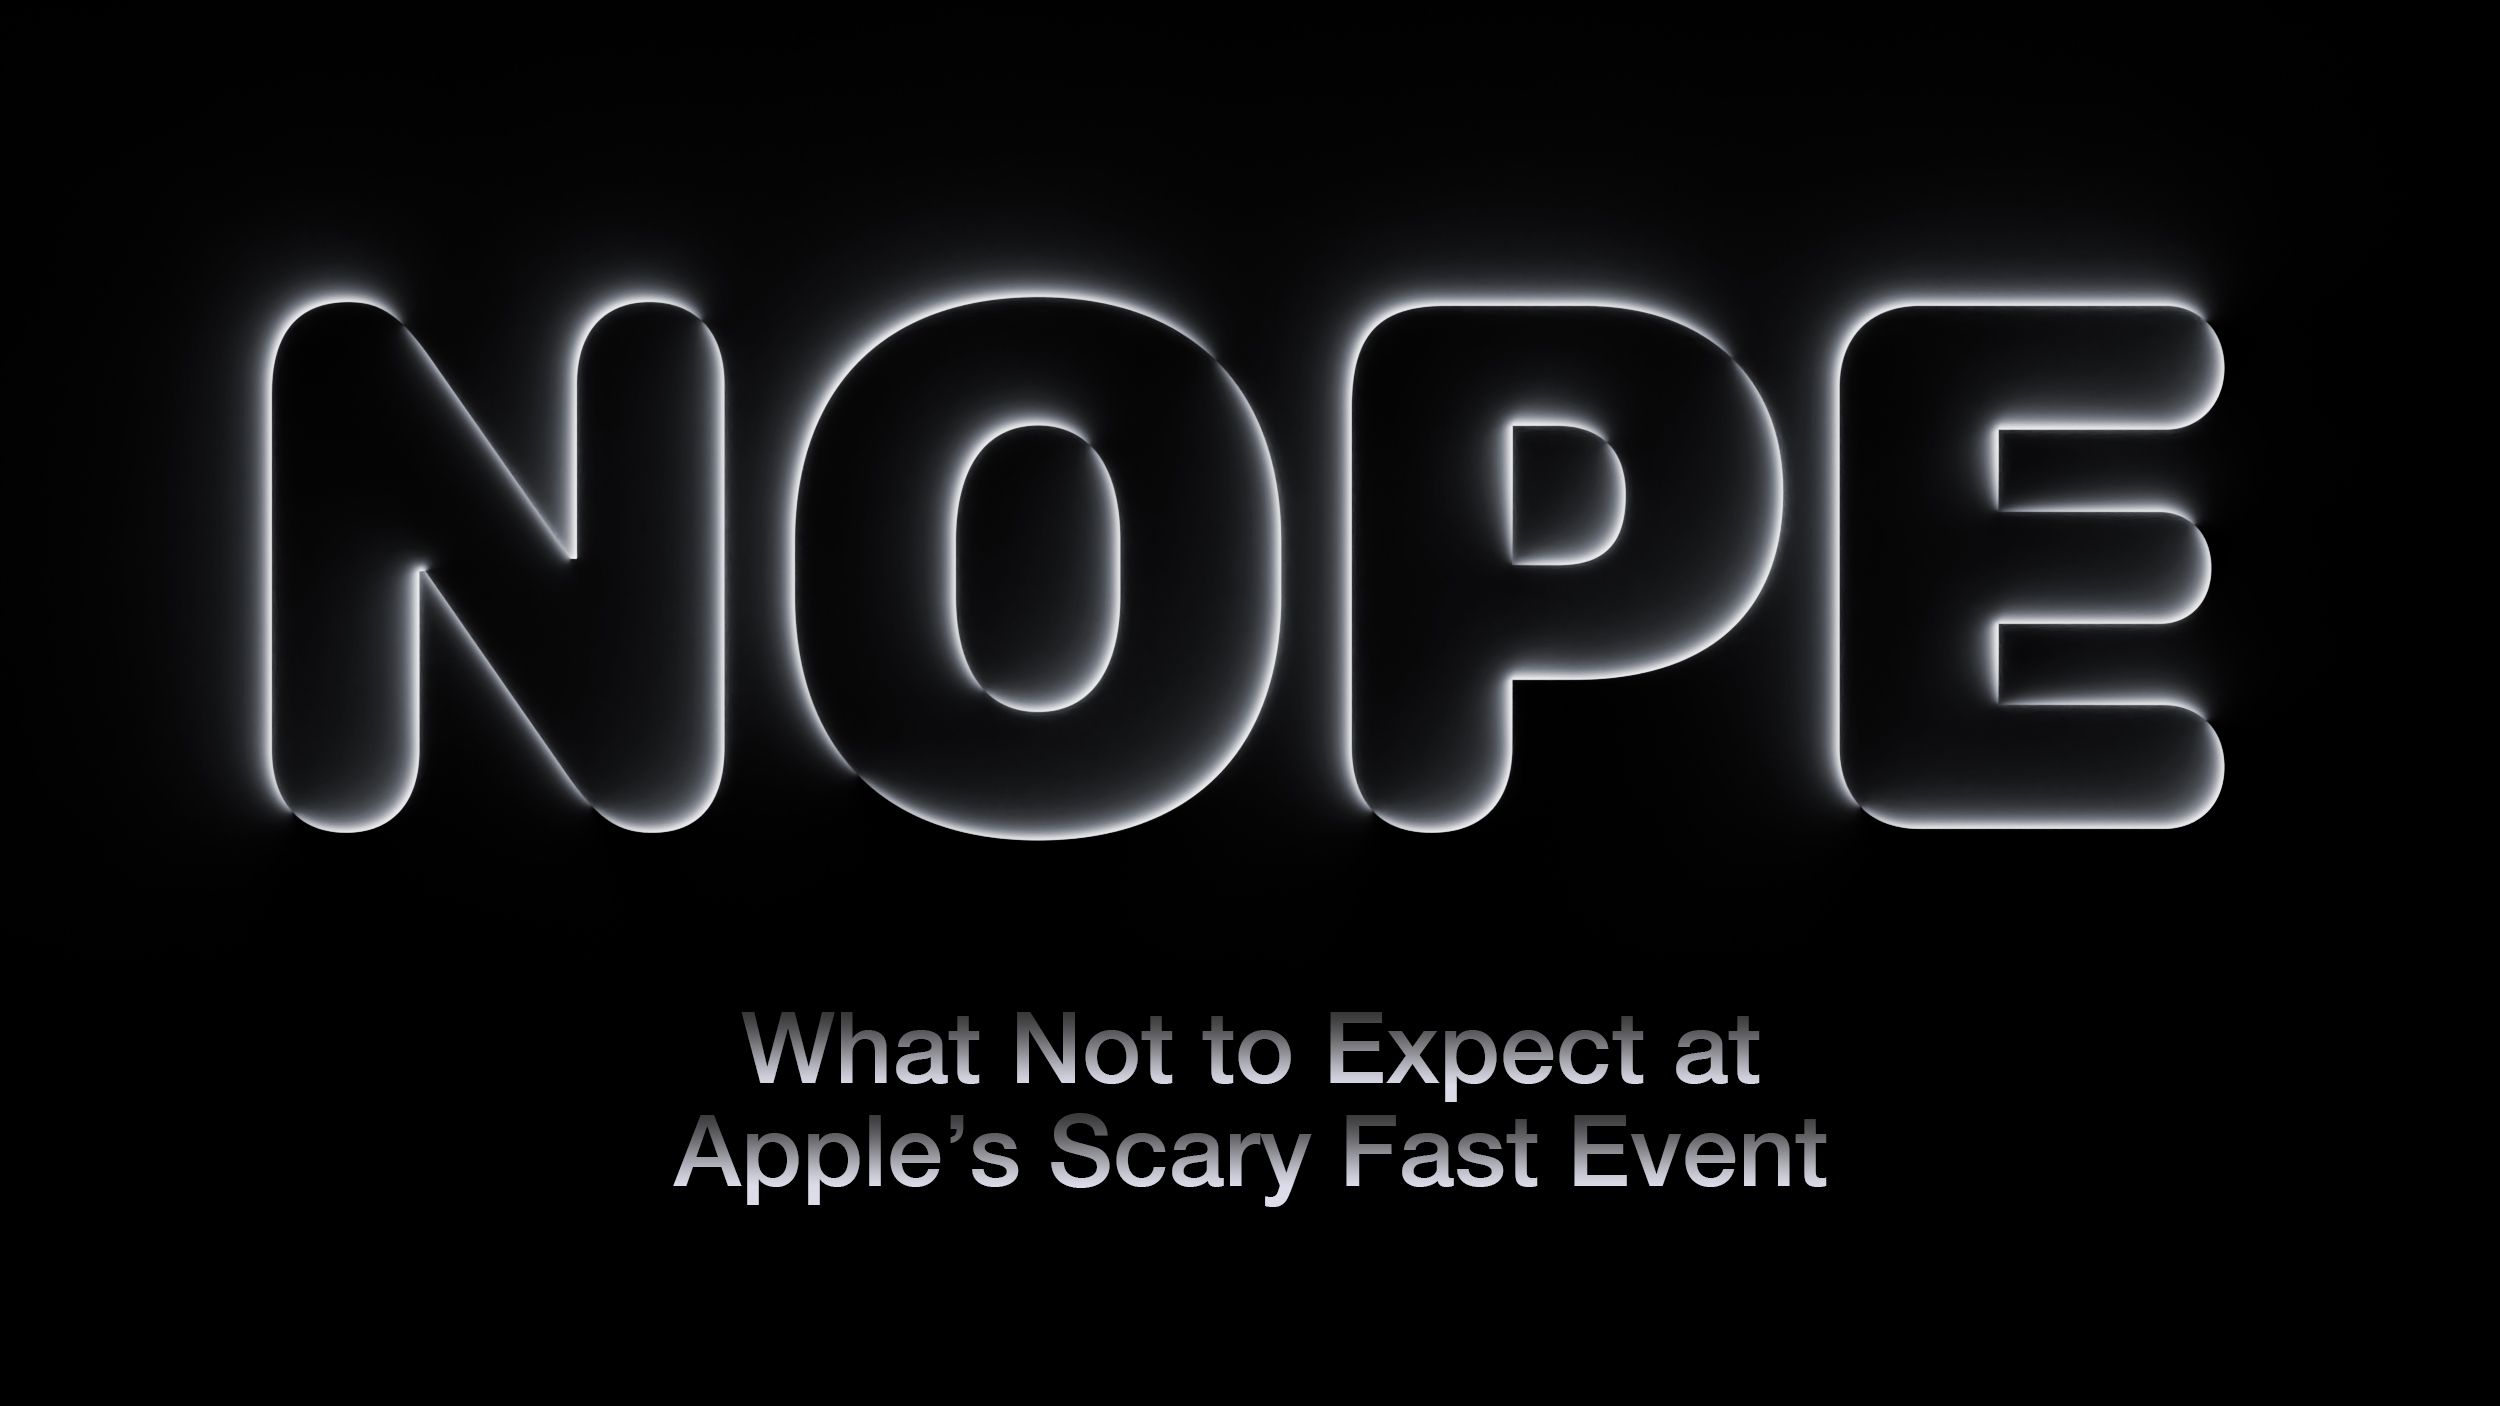 What Not to Expect at Apple's 'Scary Fast' October 30 Event